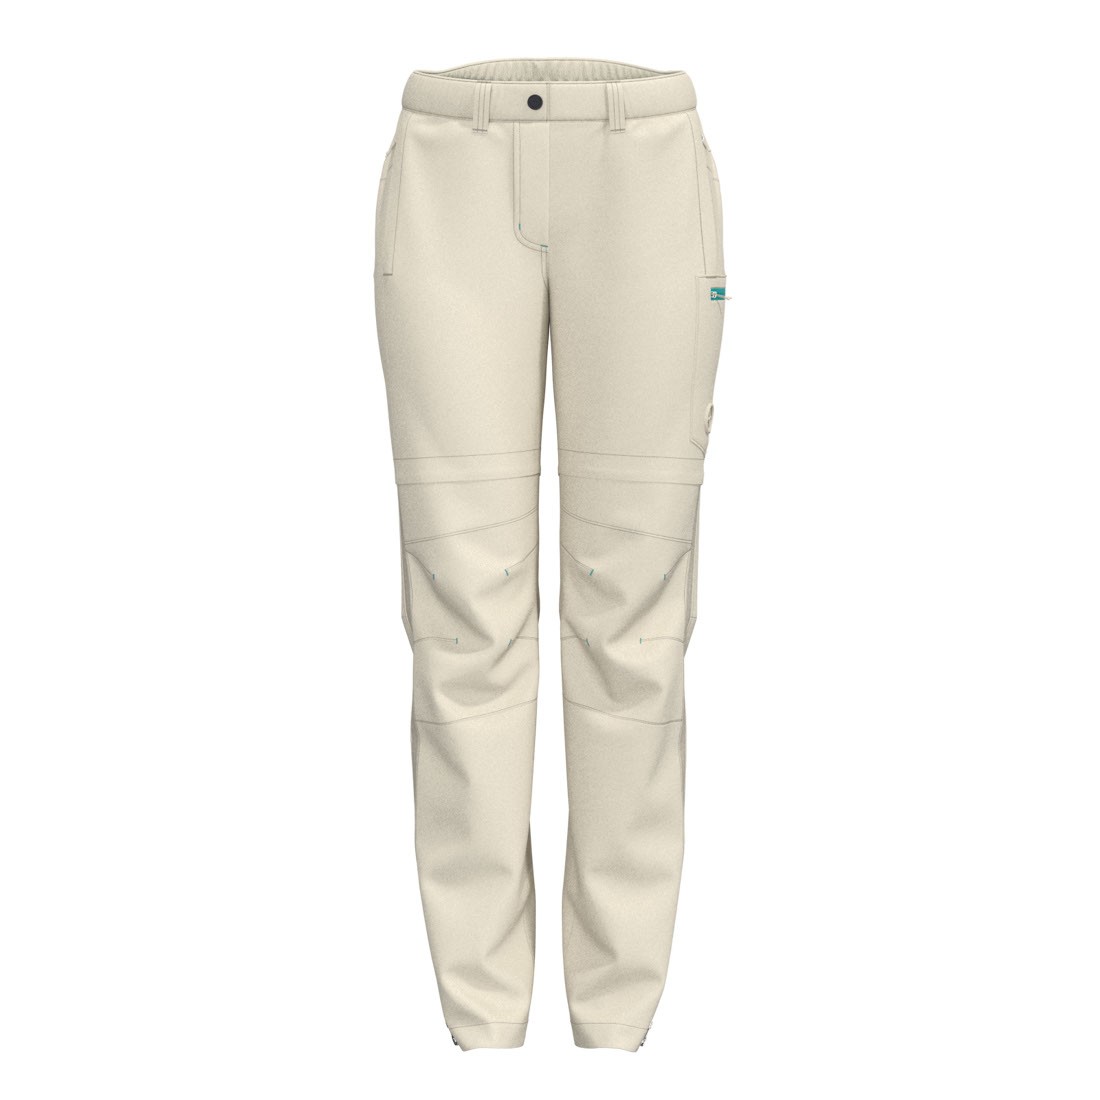 BREZZA - Lady recycled pant